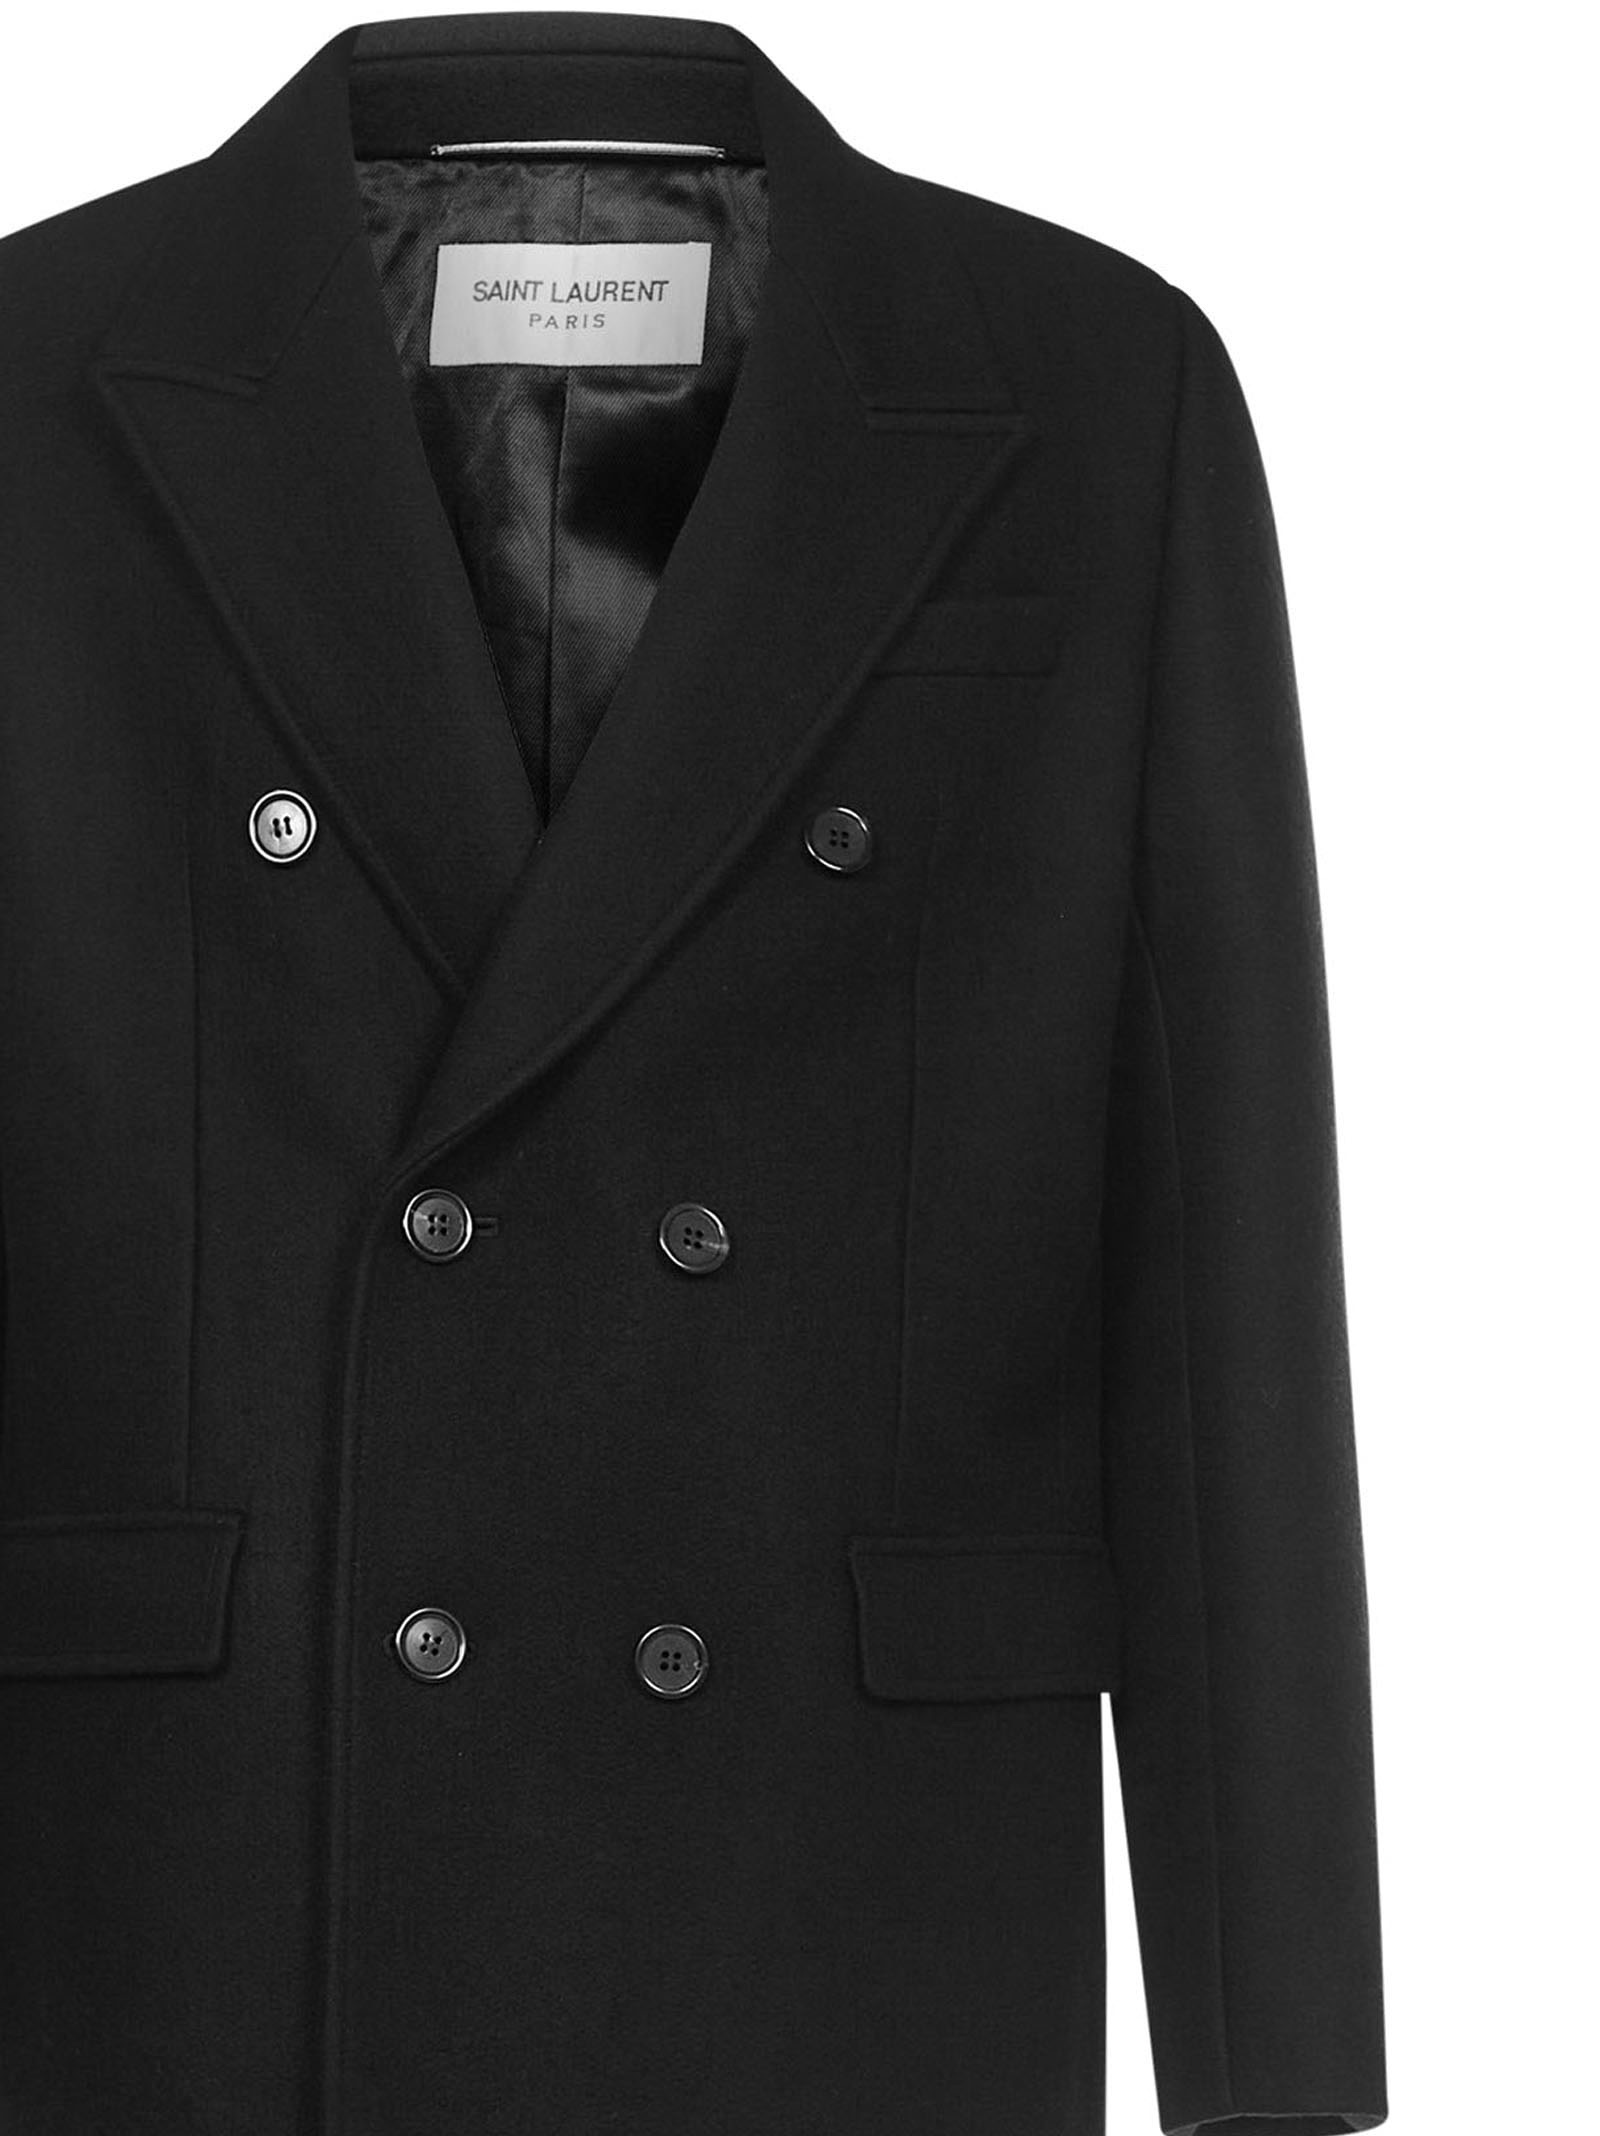 CHESTERFIELD double-breasted coat in black cashmere with peak lapel and back vent. - 3